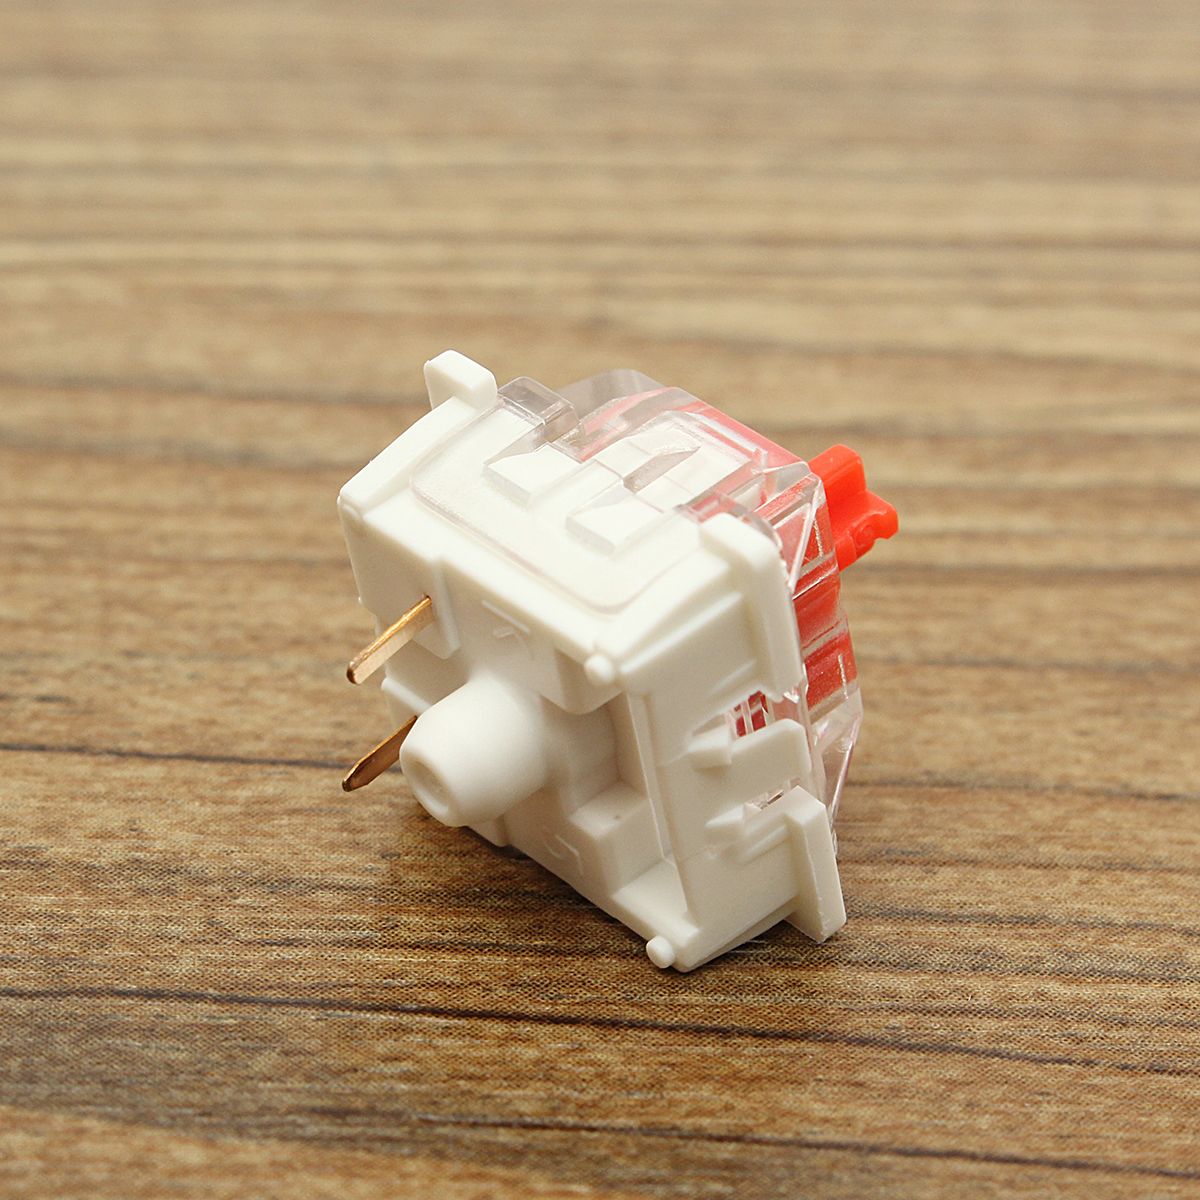 10-Pcs-RGB-Series-Red-Mechanical-Switch-for-Cherry-MX-Mechanical-Keyboard-Replacement-1114348